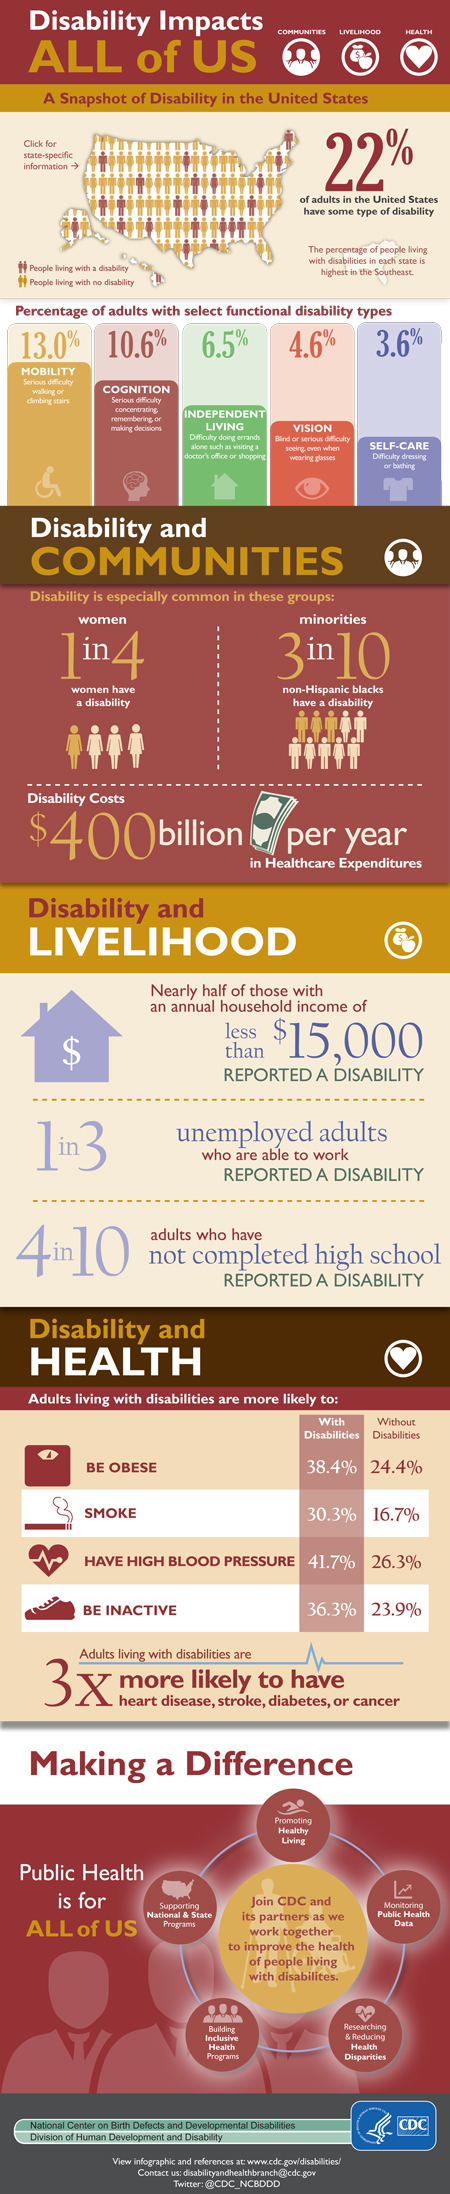 disabilities impacts all of us cdc